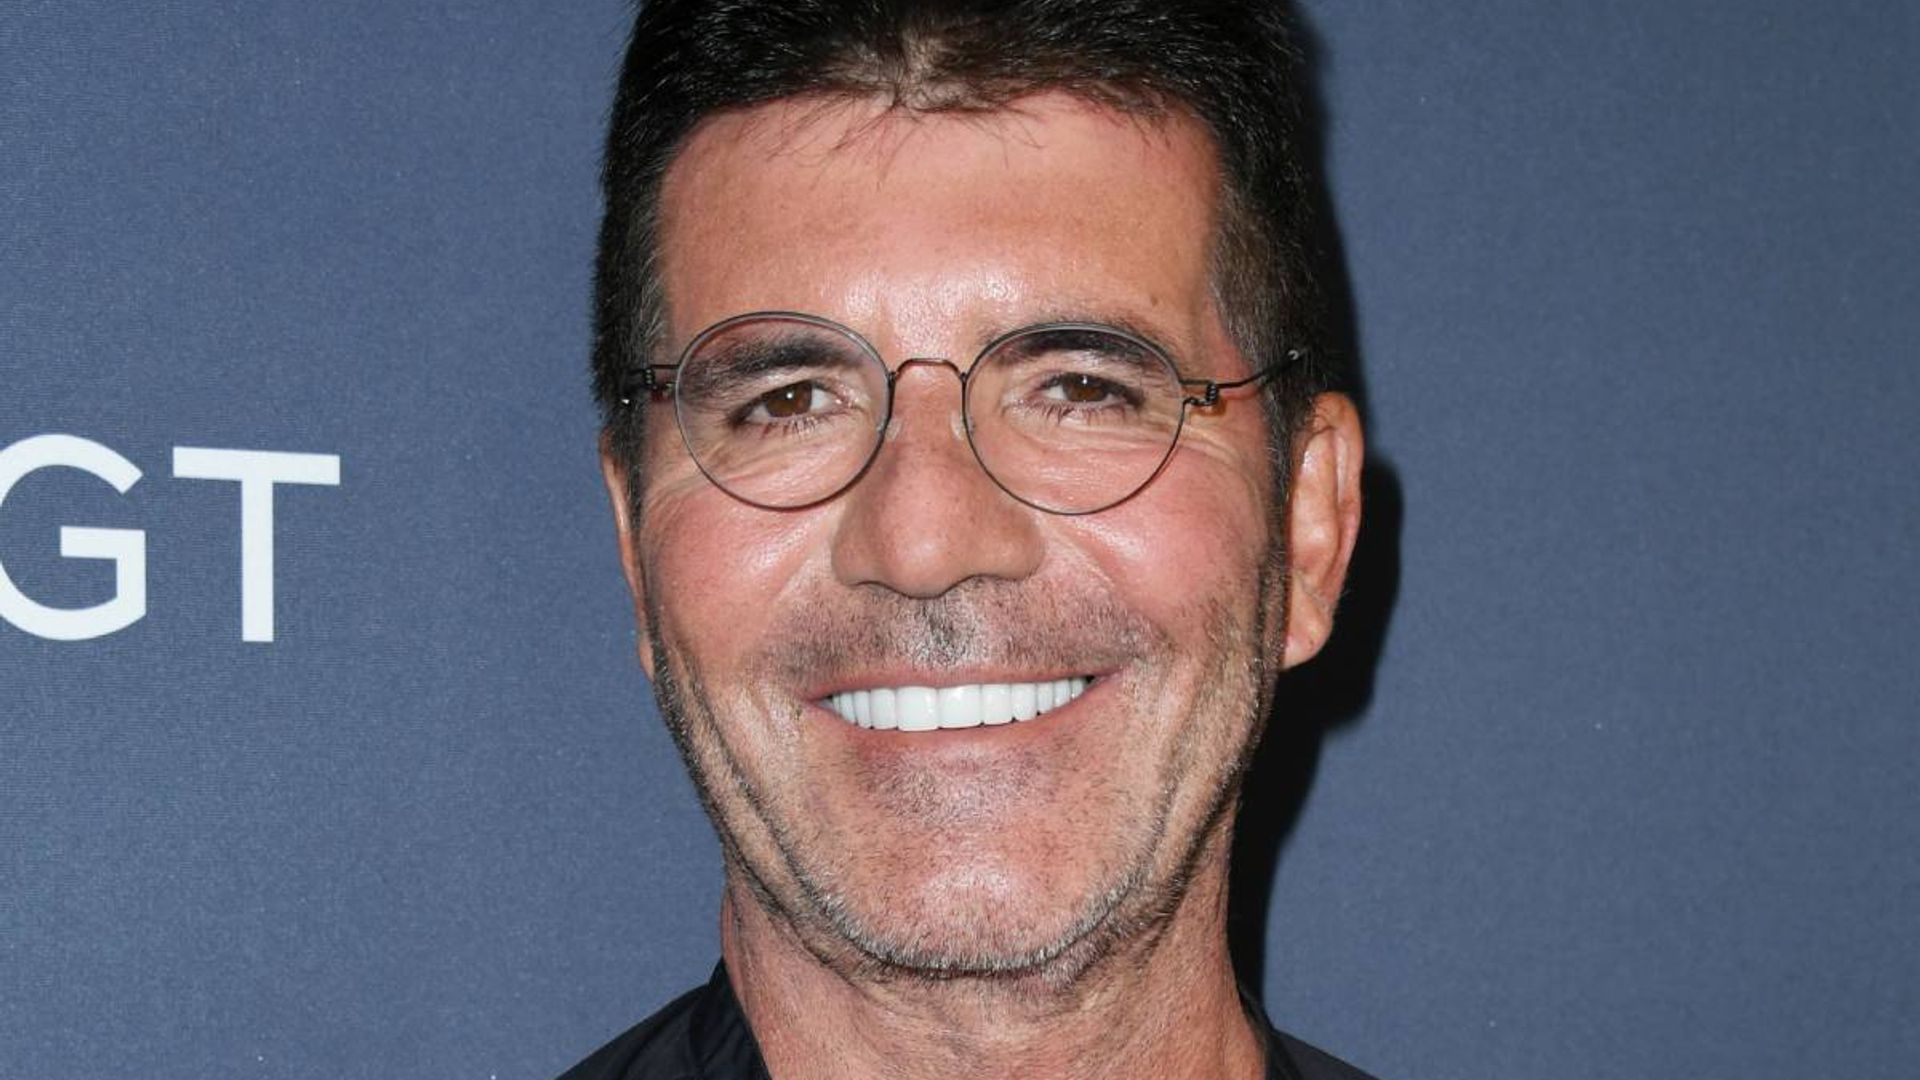 Simon Cowell transforms appearance during recovery from broken back